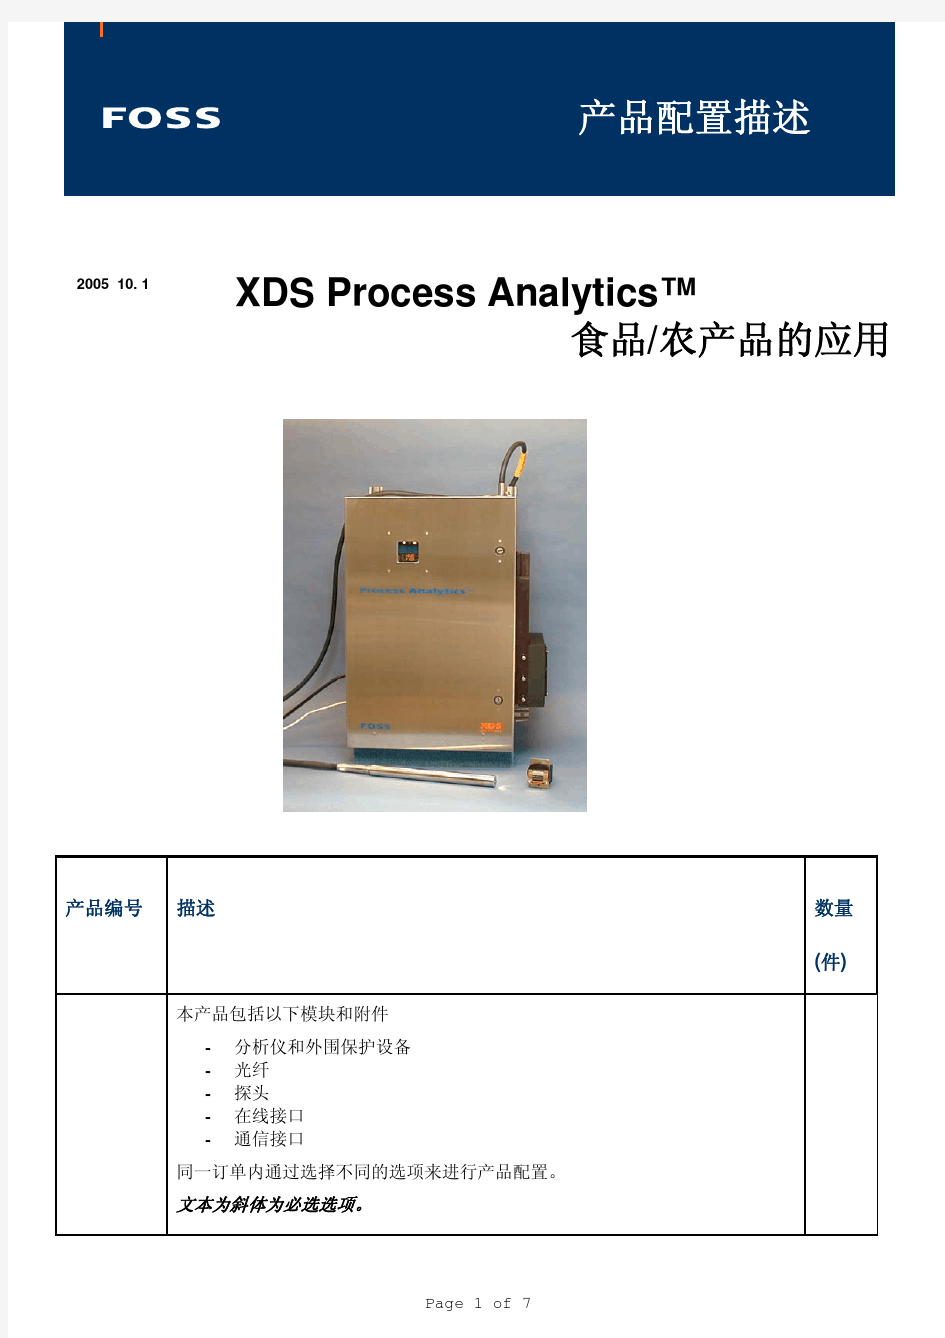 foss XDS PA在线配置资料